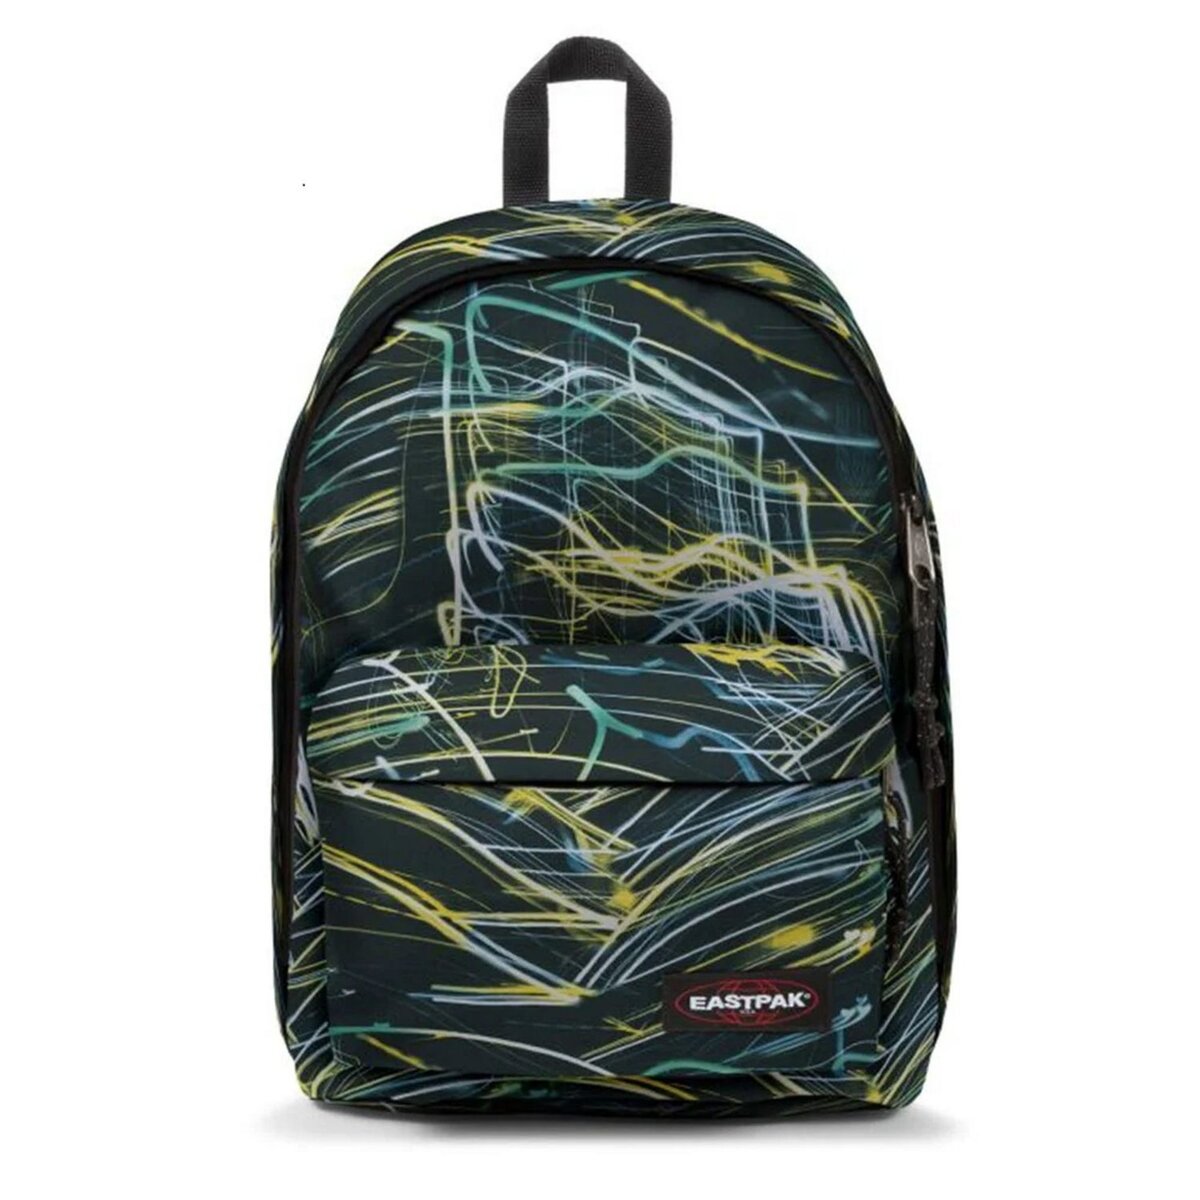 EASTPAK Sac à dos OUT OF OFFICE blured lines vert 2 compartiments